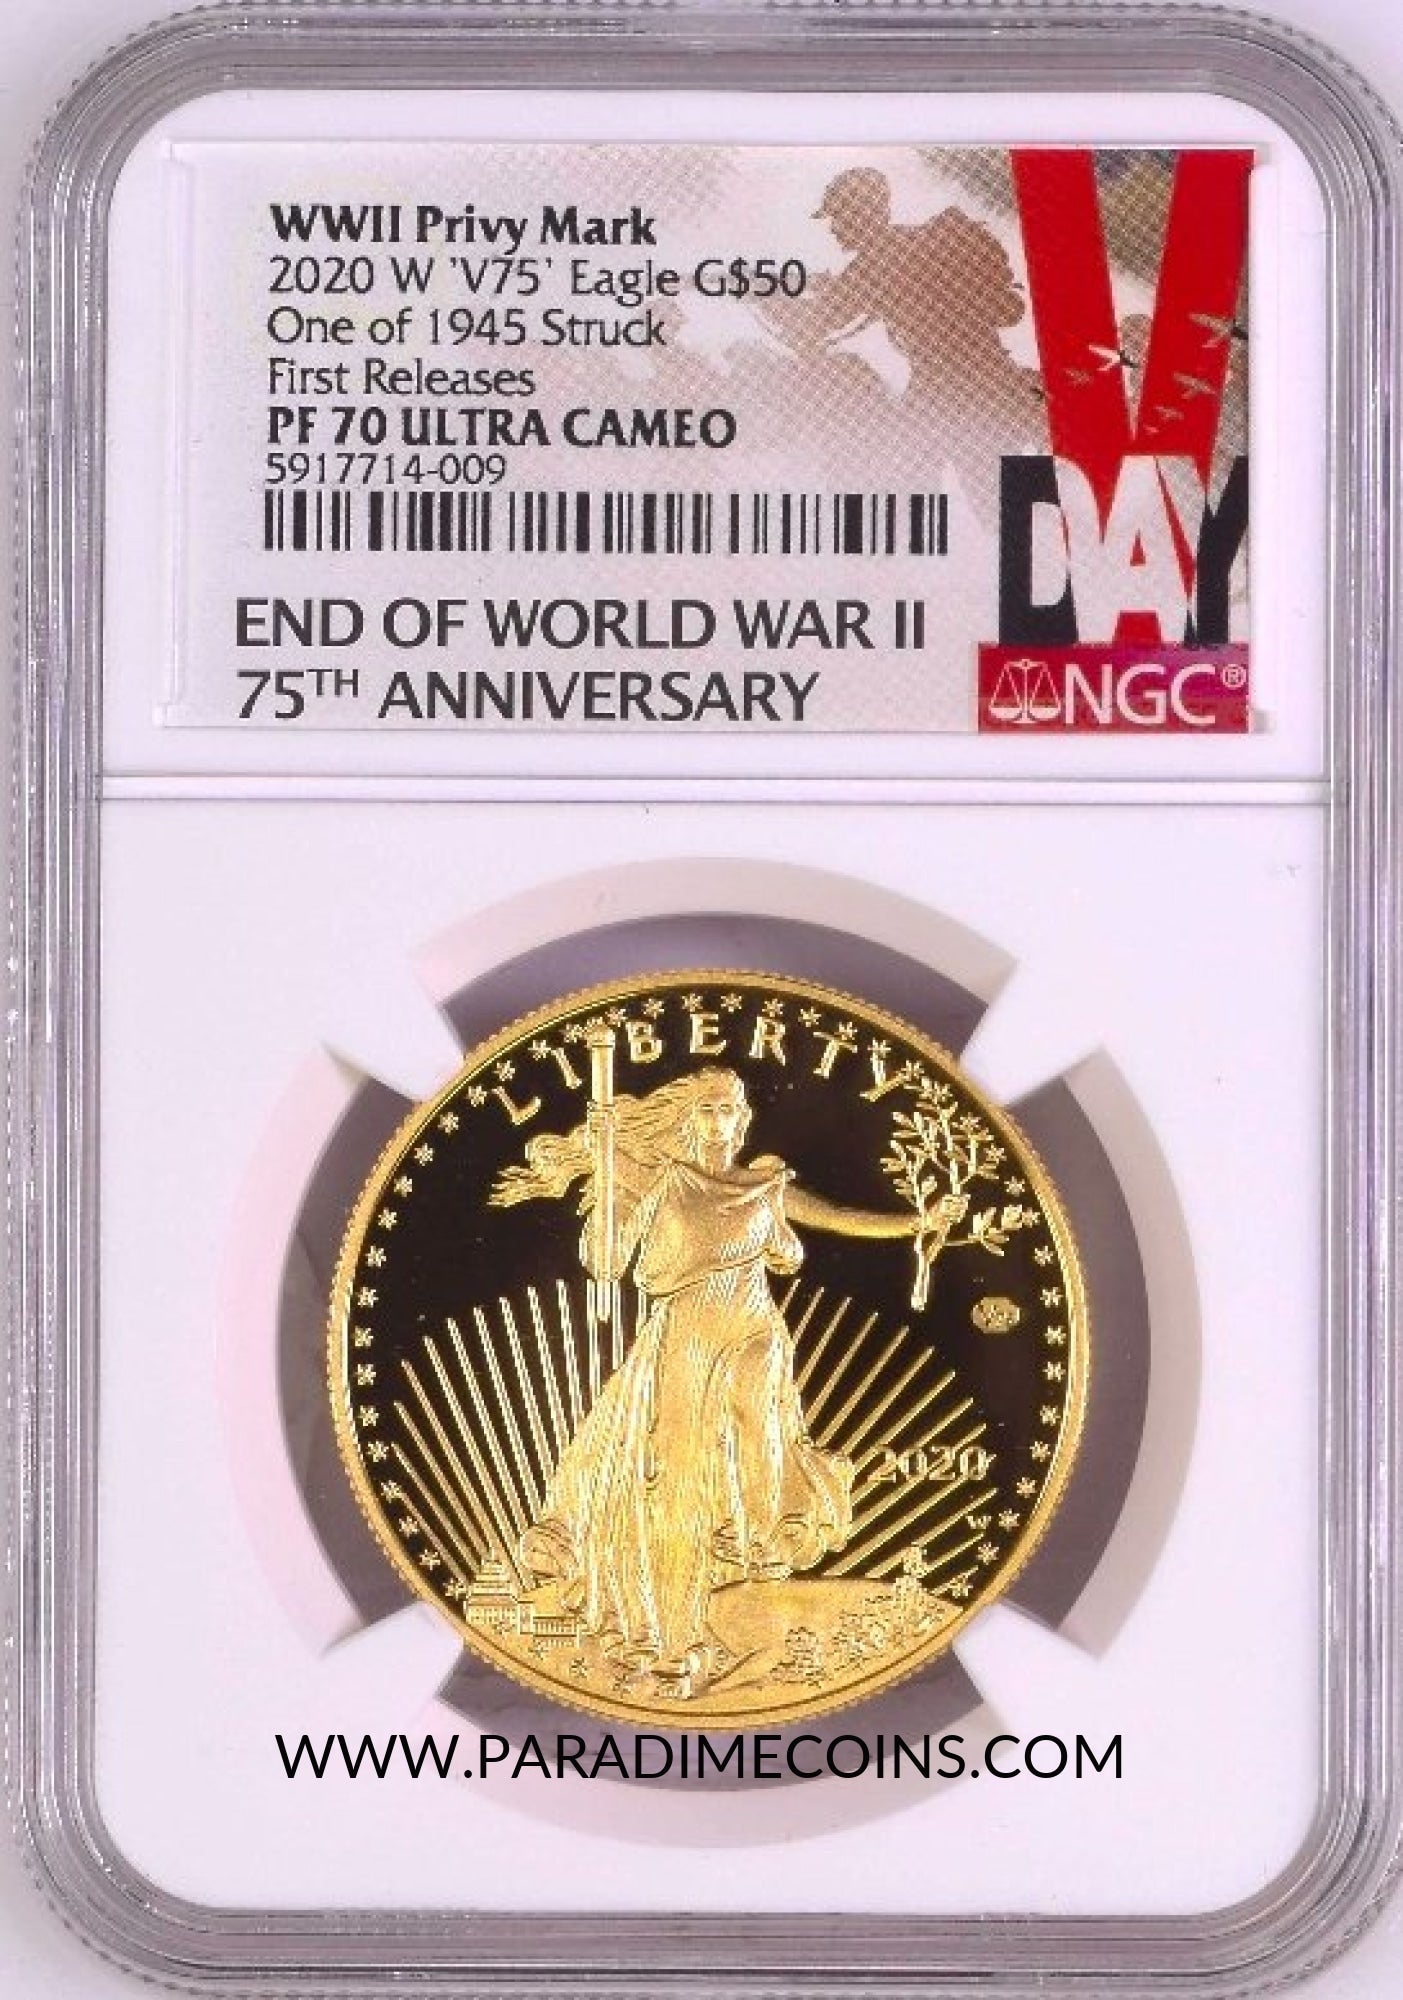 2020-W V75 $50 WWII Privy NGC PF70UCAM First Releases 20XE American Gold Eagle #5 - Paradime Coins US Coins For Sale